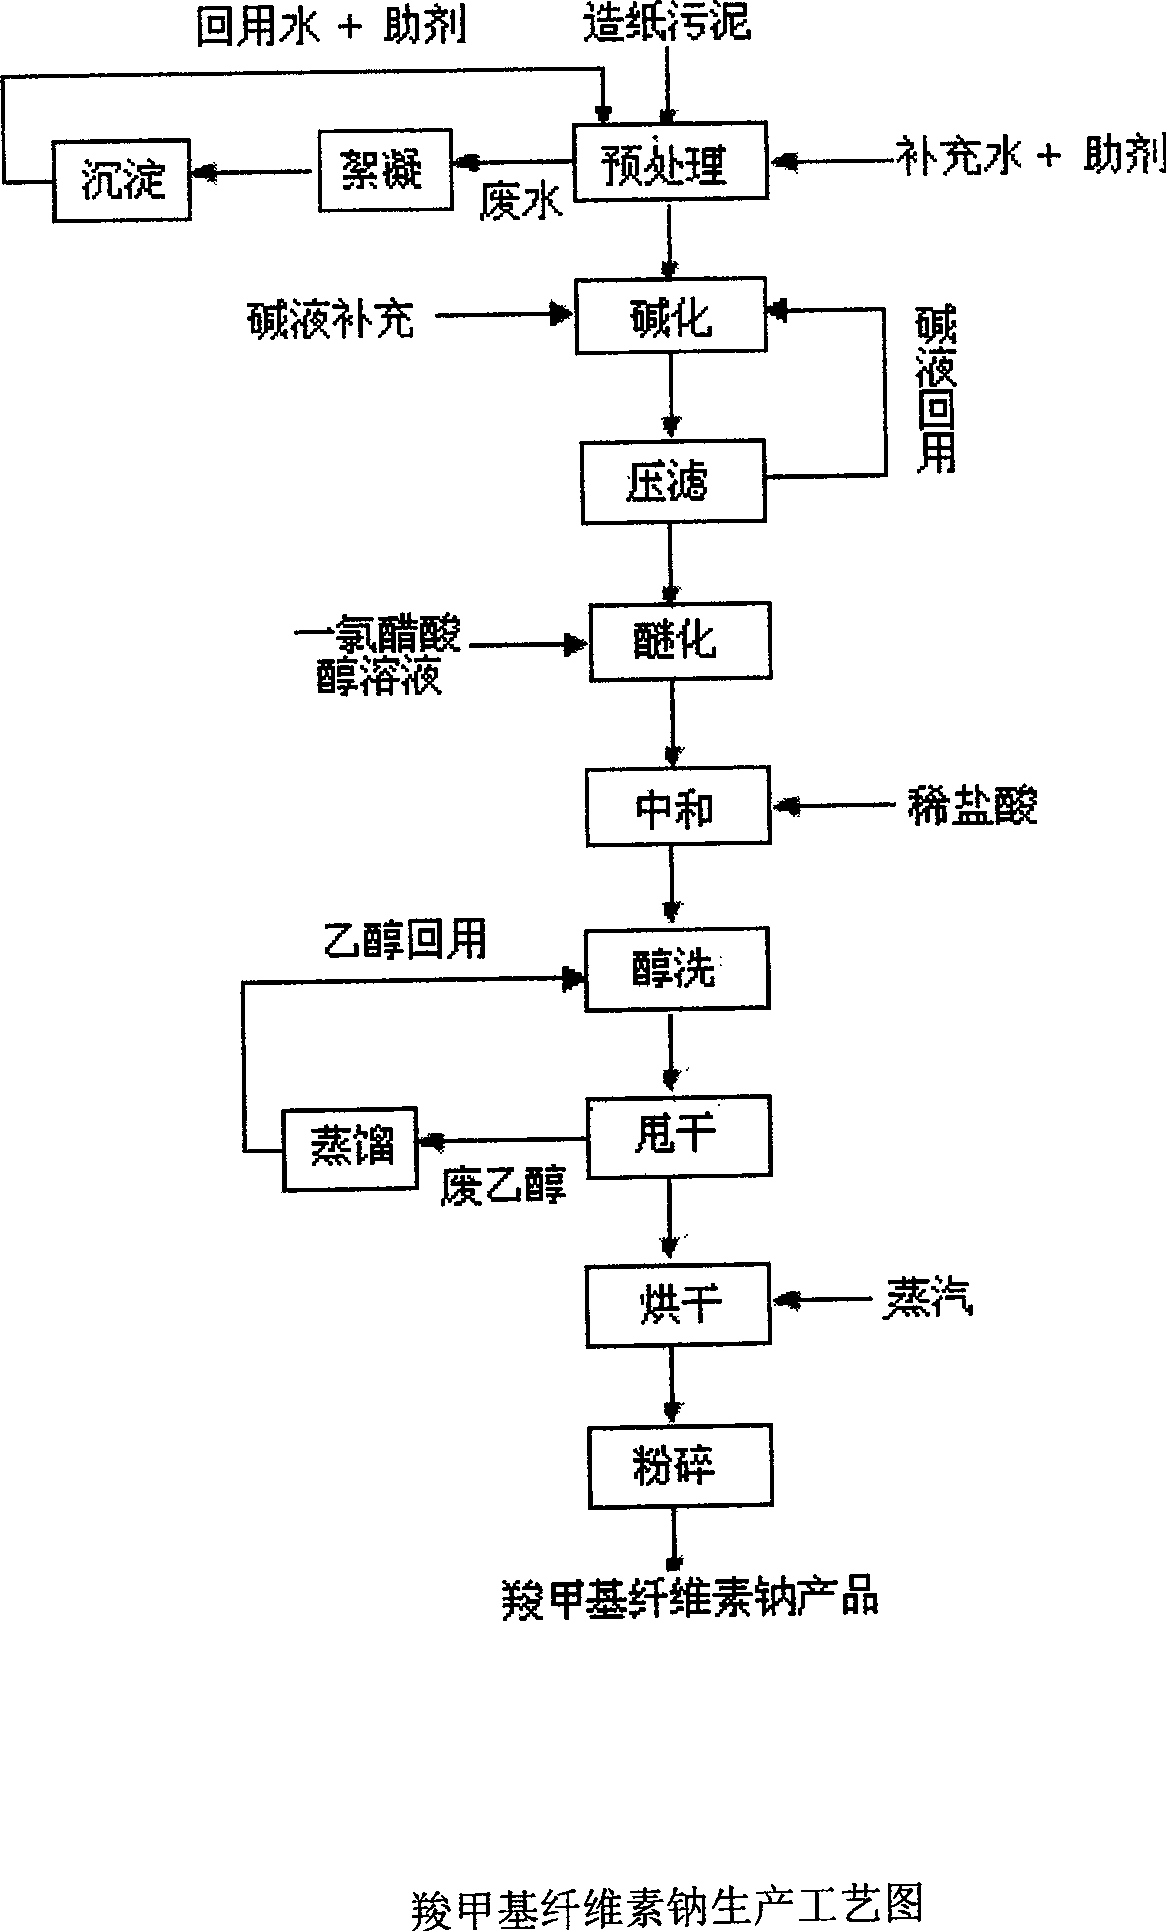 Process of producing sodium carboxymethyl cellulose with papermaking sludg as material